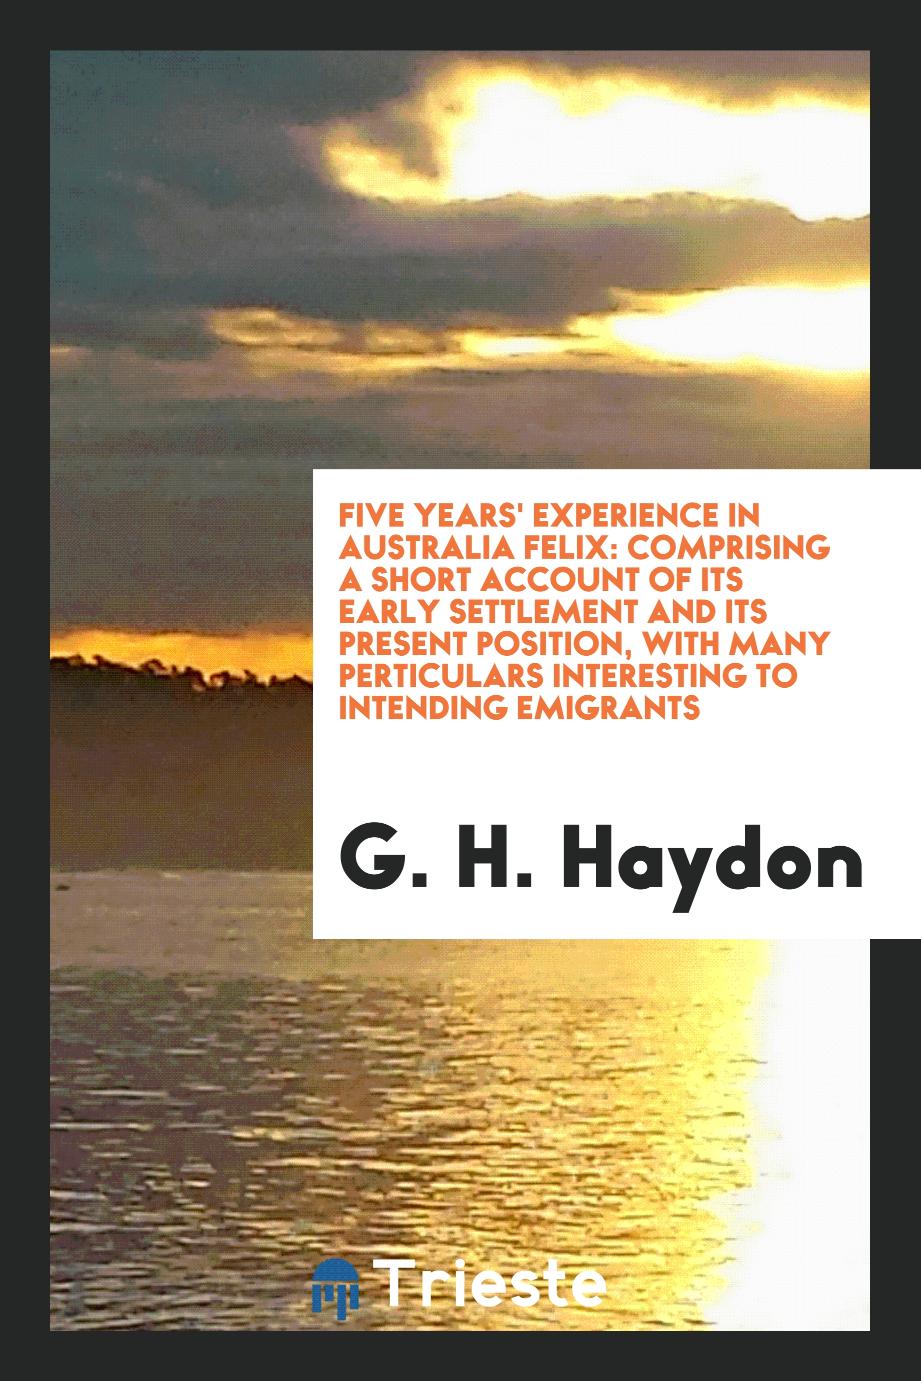 Five Years' Experience in Australia Felix: Comprising a Short Account of Its Early Settlement and Its Present Position, with Many Perticulars Interesting to Intending Emigrants